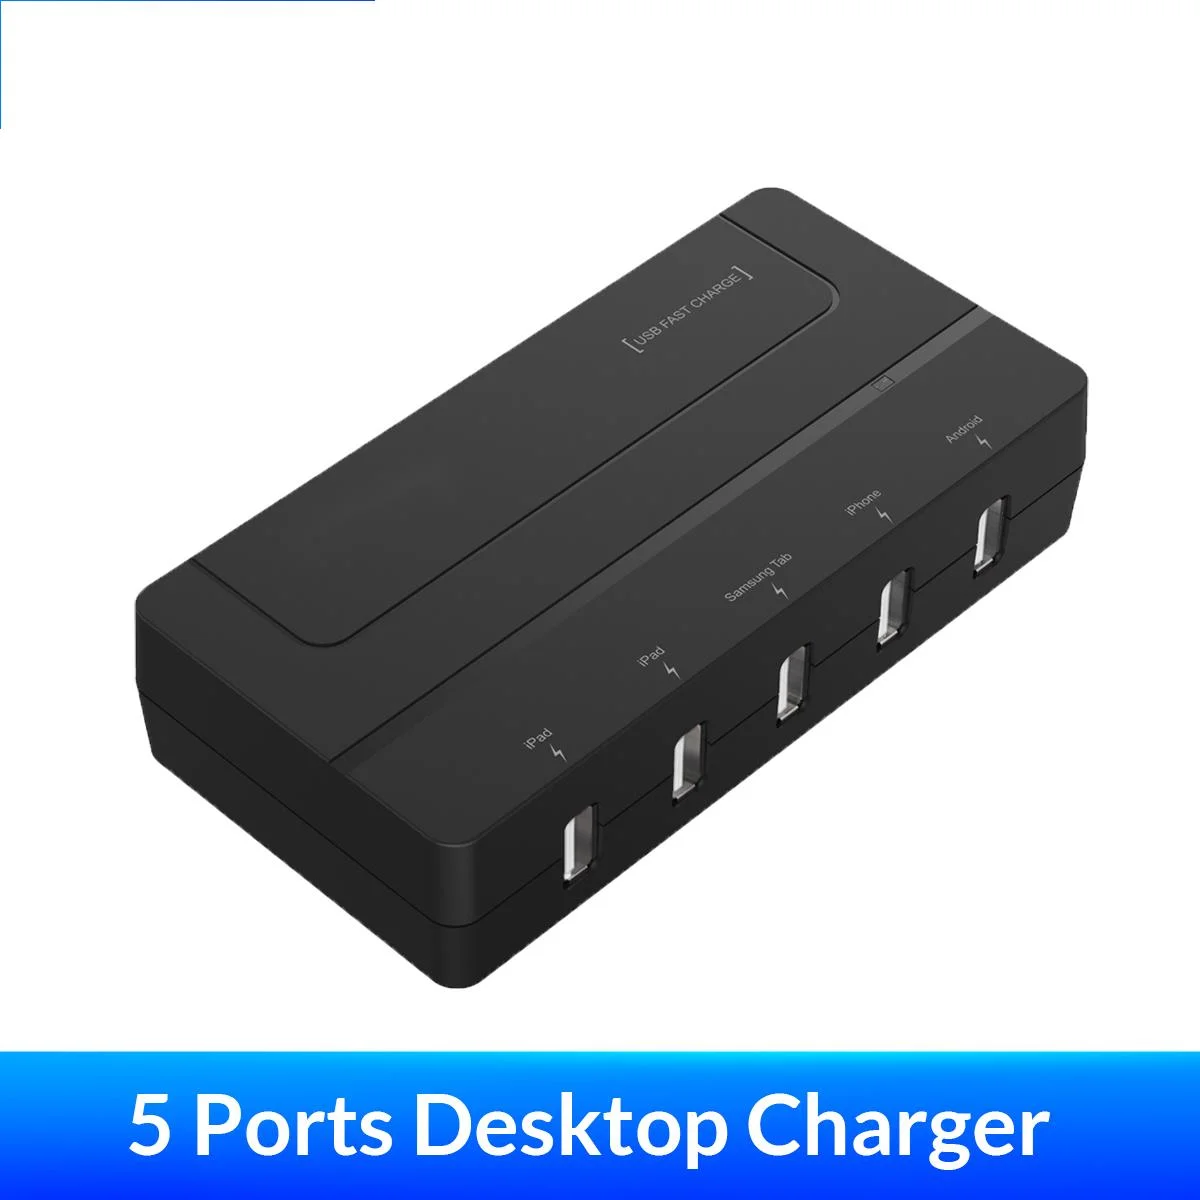 

5 Ports Desktop Charger USB Fast Charger 5V 6A Max 30W for Huawei Xiaomi iPhone iPad Android Samsung Tab Galaxy S6 Black